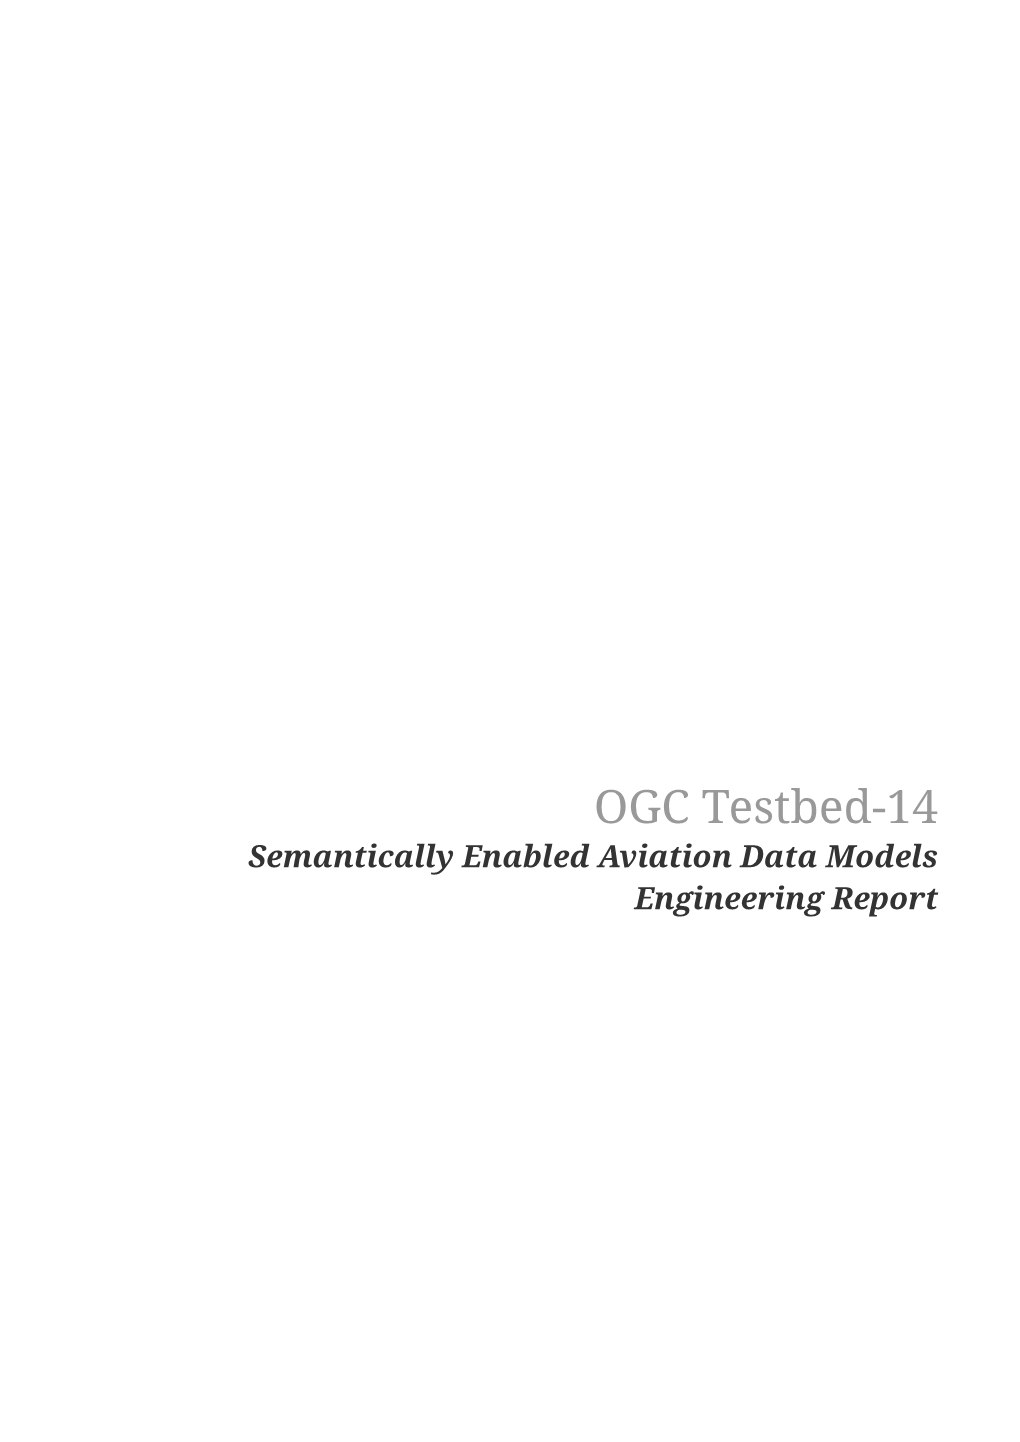 OGC Testbed-14: Semantically Enabled Aviation Data Models Engineering Report